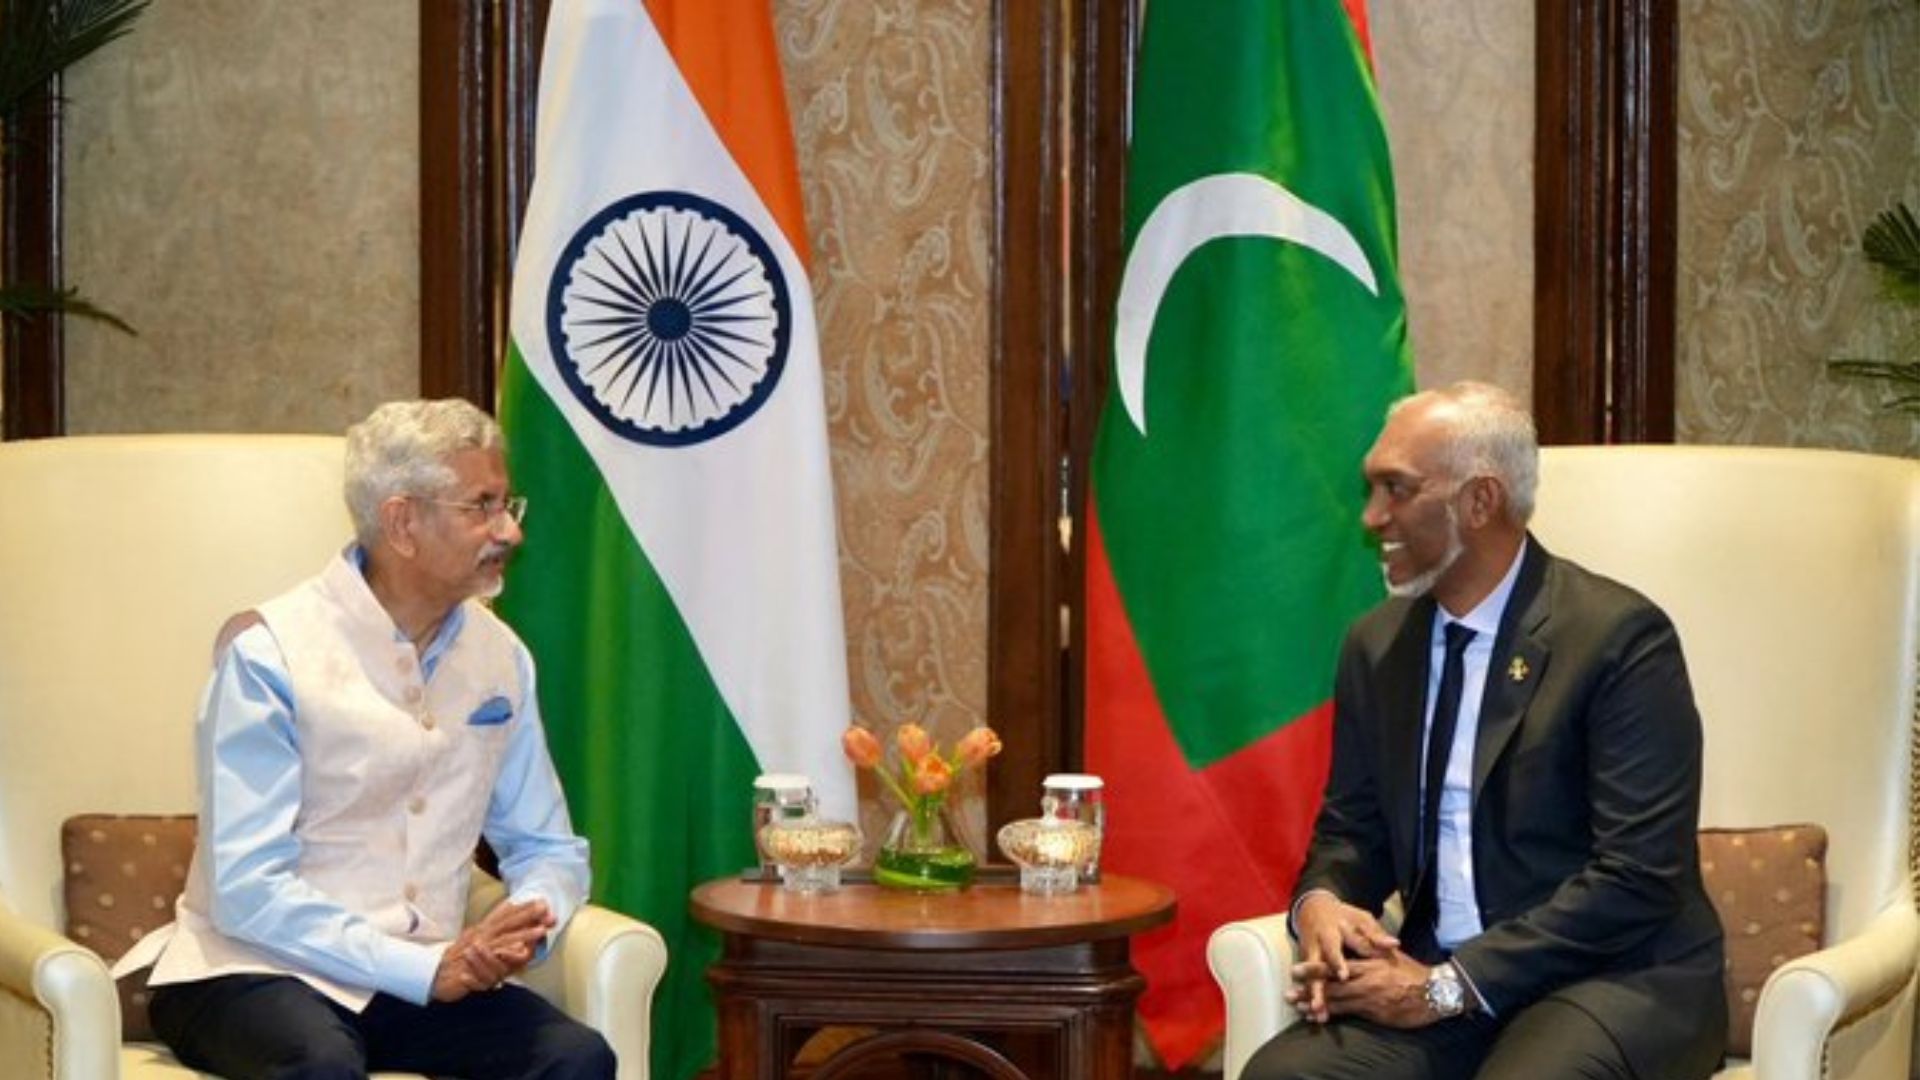 India’s External Affairs Minister Meets Maldivian President Amid Strained Relations